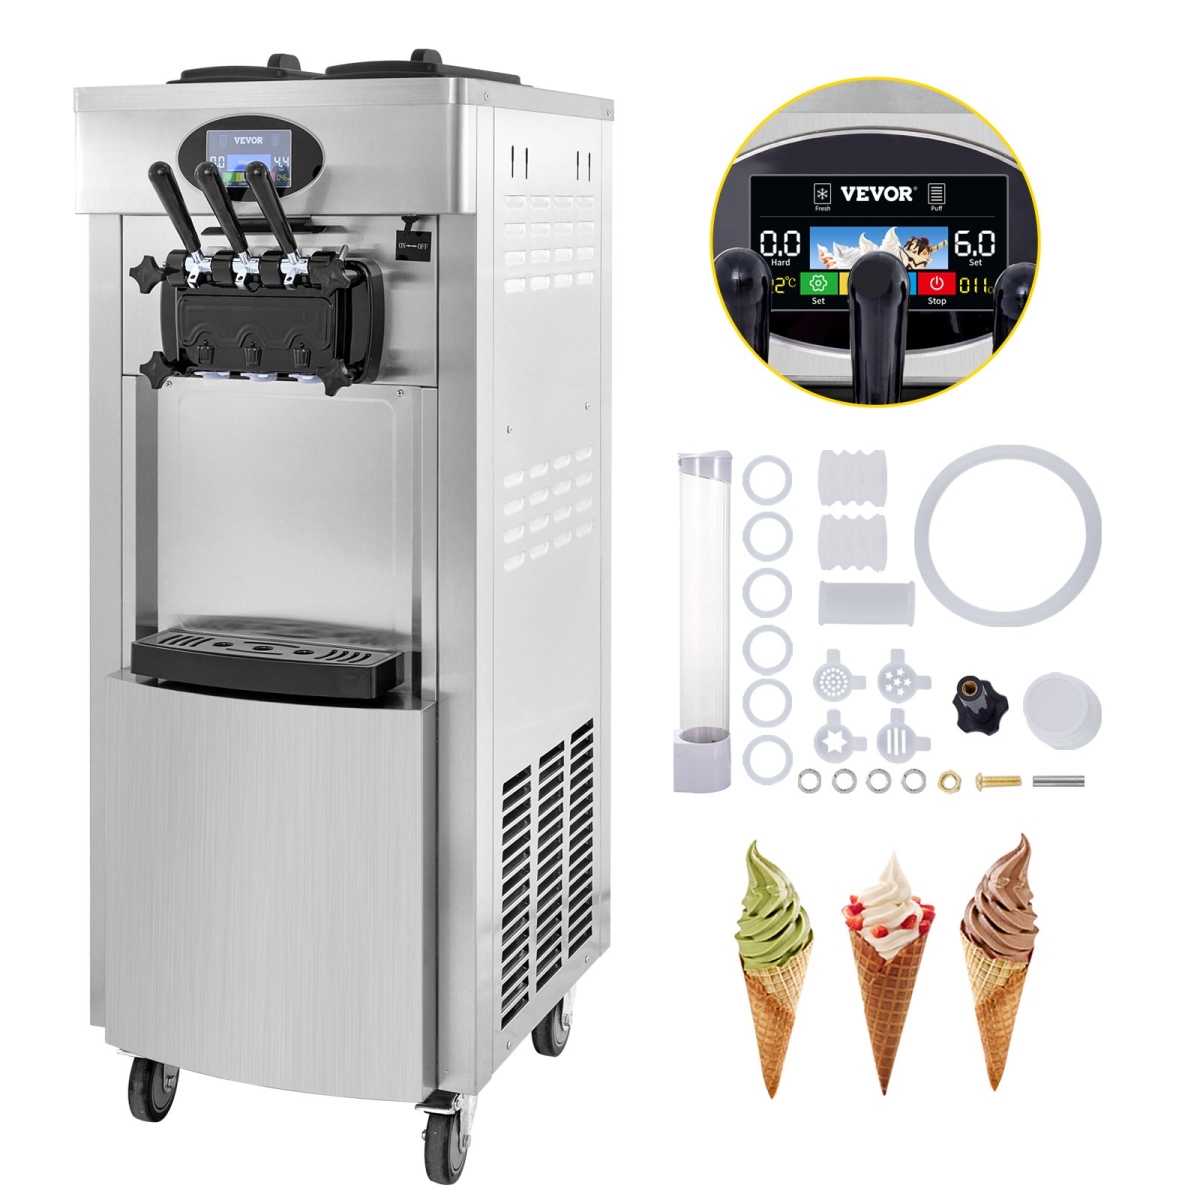 Picture of Vevor BJLJLSRZYKF-8228HV1 2200W Commercial Soft Ice Cream Machine&#44; 3 Flavors 5.3 to 7.4 gal Per Hour PreCooling at Night Auto Clean LCD Panel for Restaurants Snack Bar - Sliver